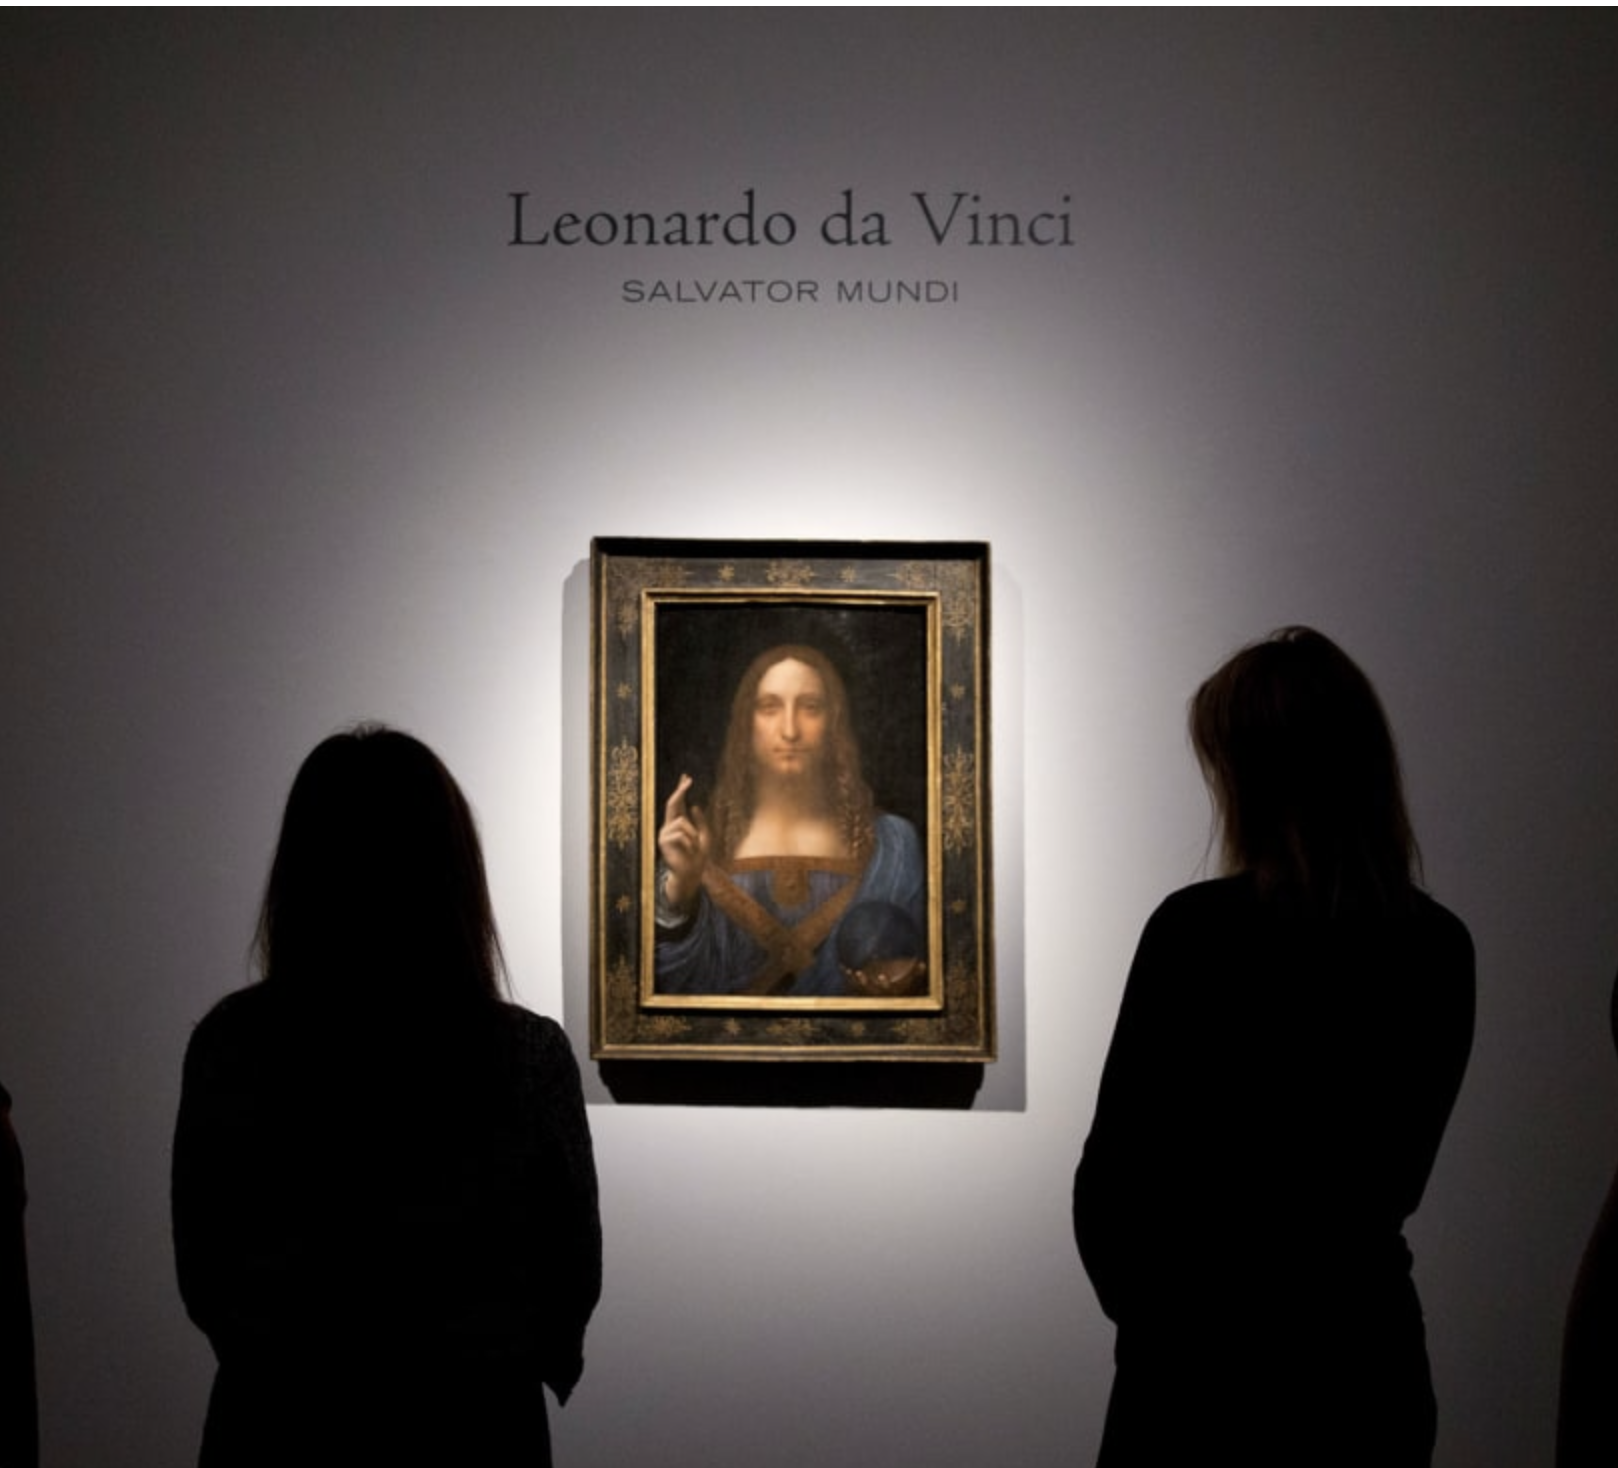 Major museum casts fresh doubt over the authenticity of $450M 'Salvator Mundi'